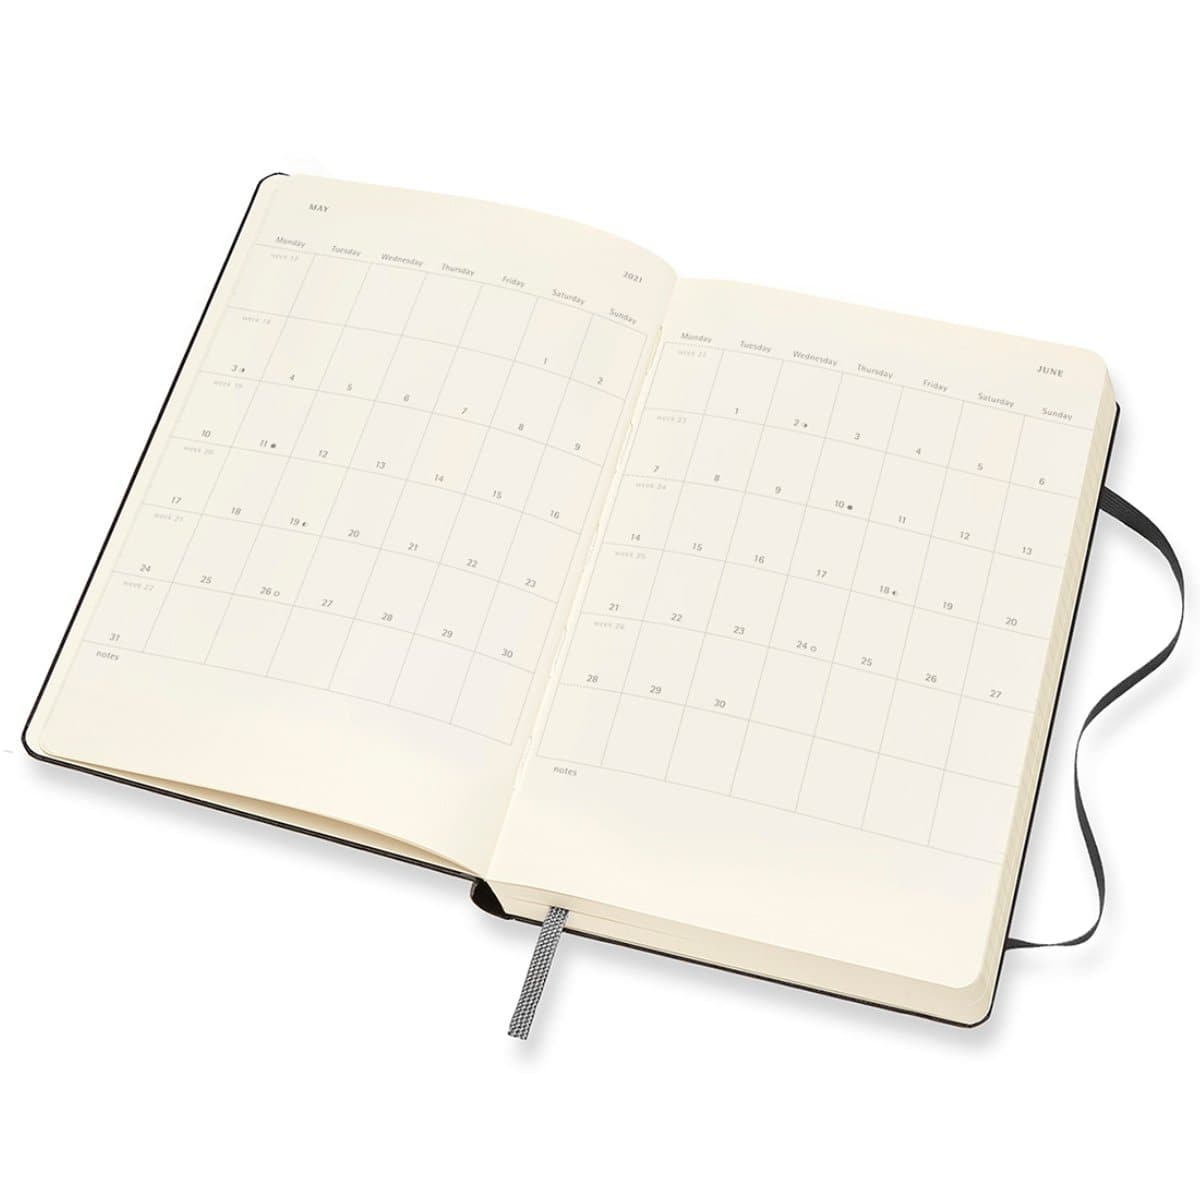 MOLESKINE 2024 Daily Diary/Planner A5, 13 x 21 cm, hardcover